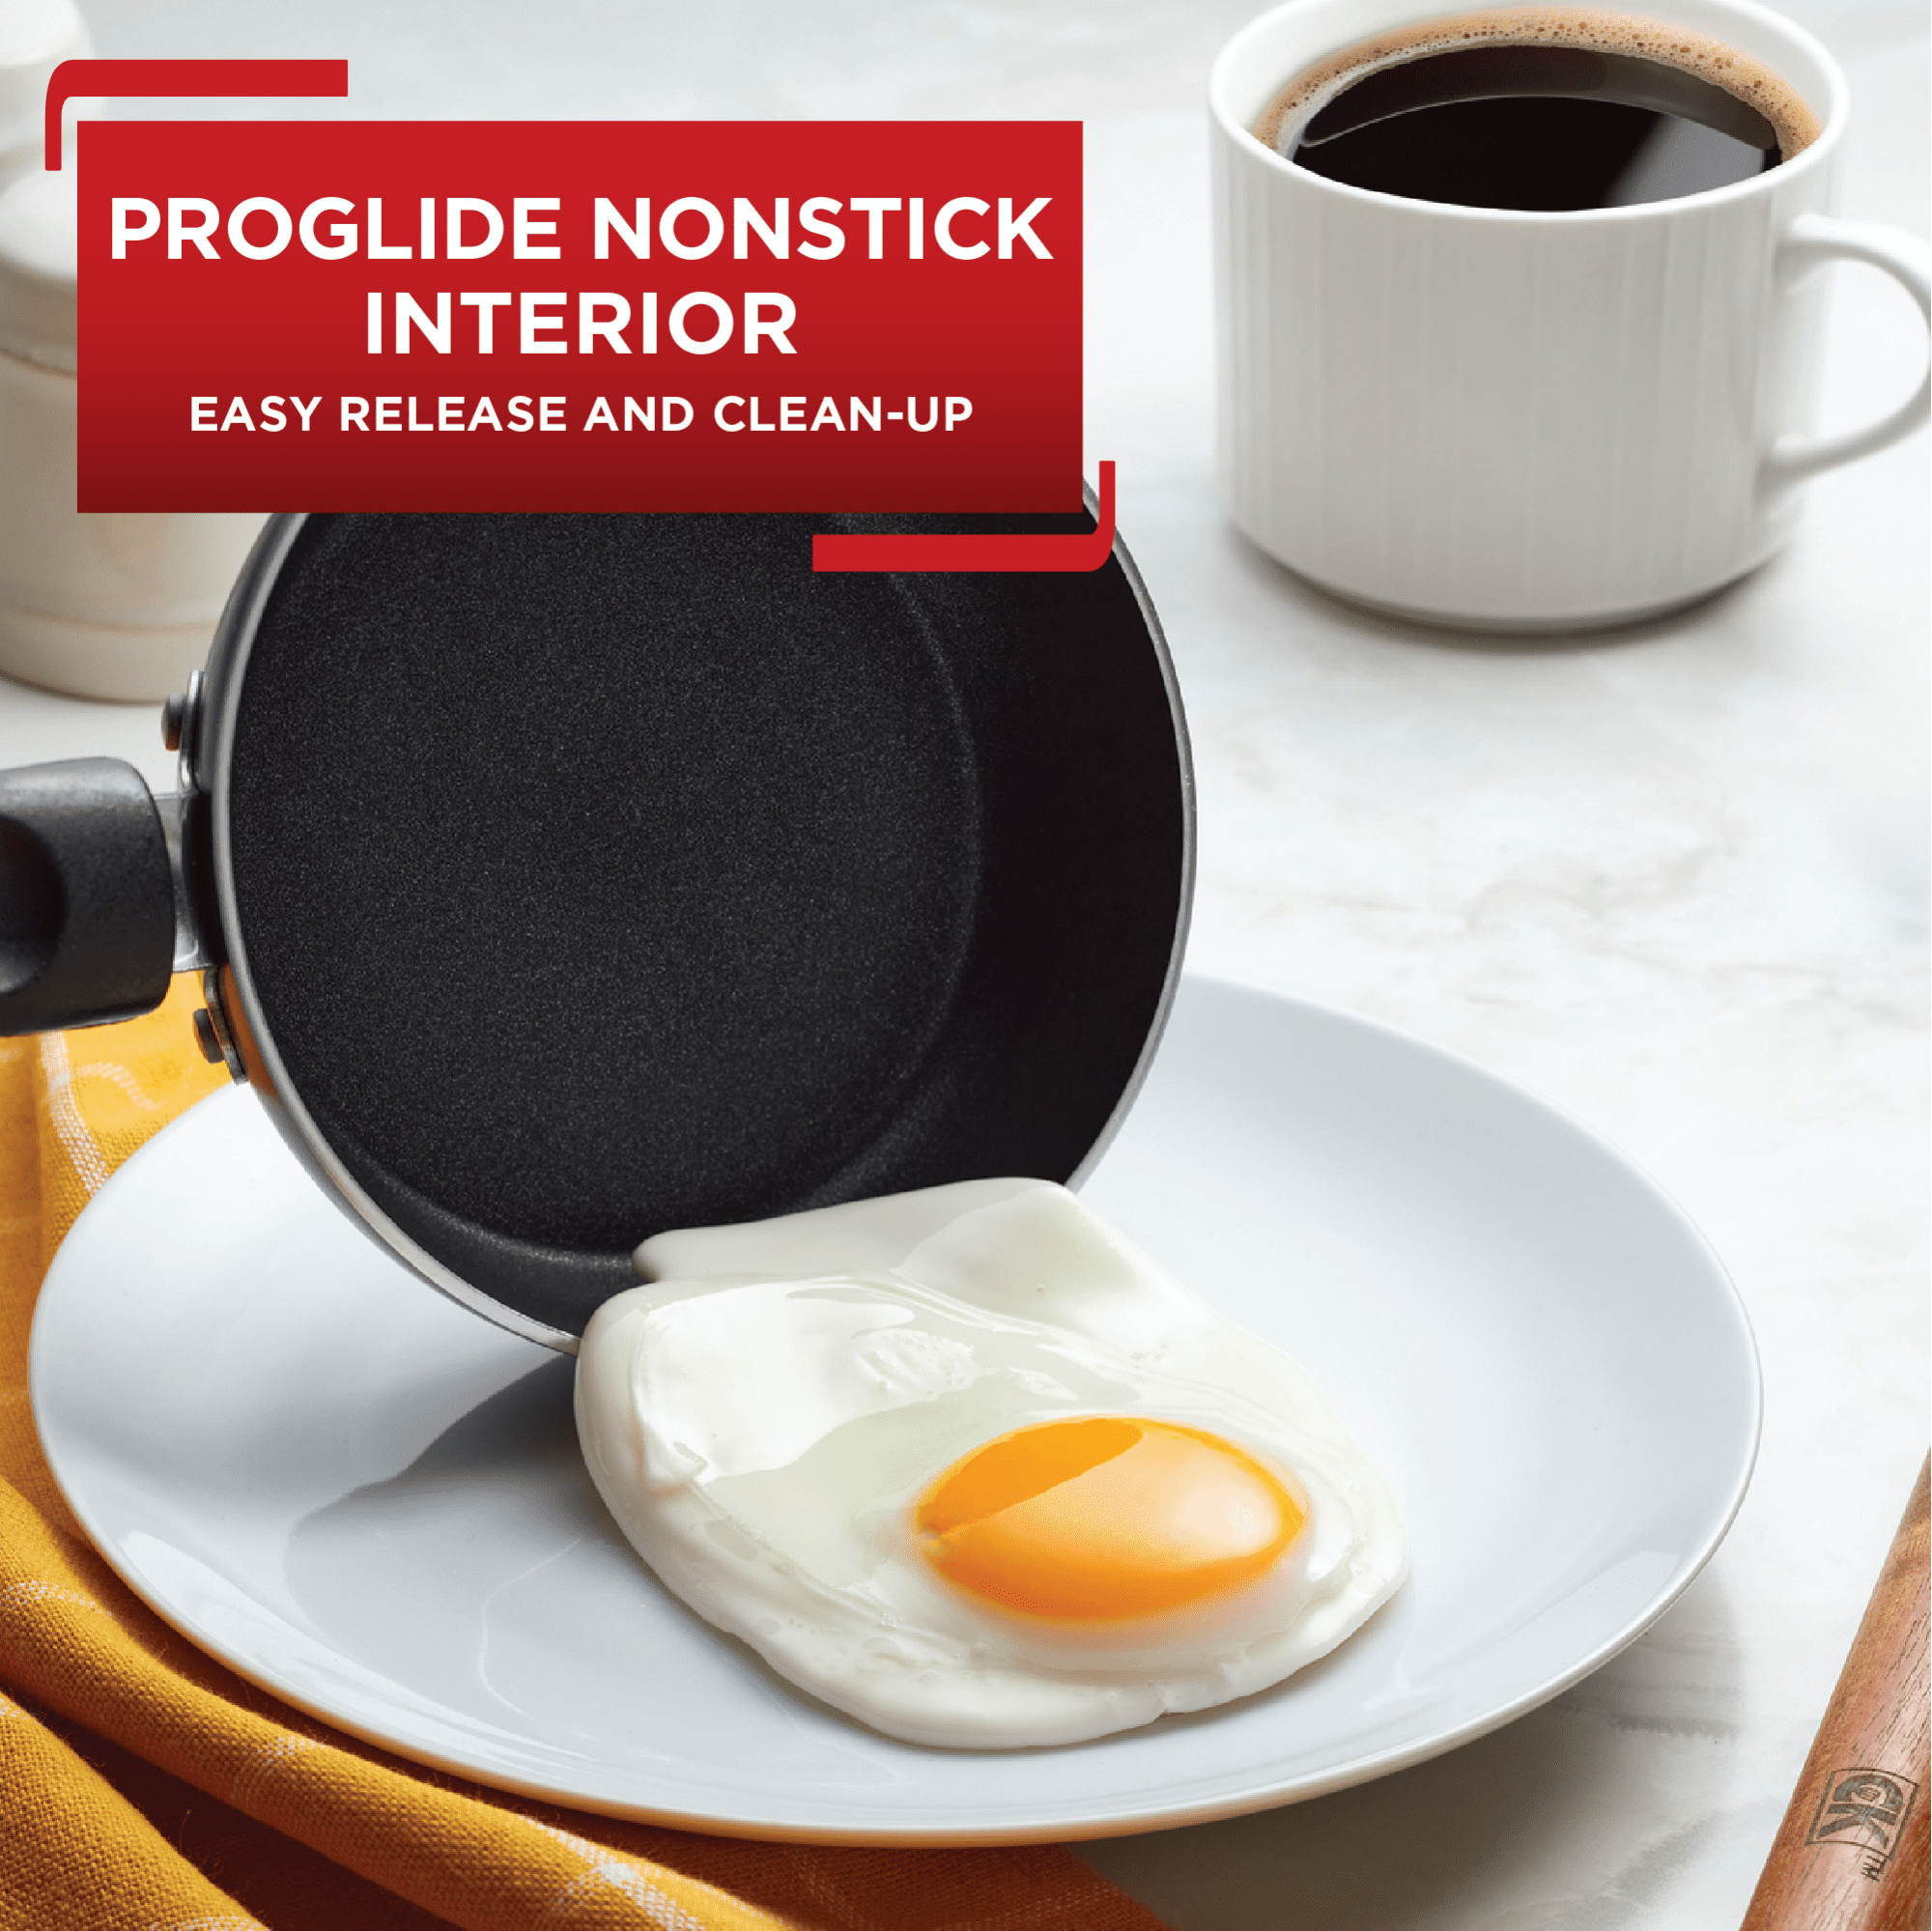 IMUSA IMUSA Talent Master PTFE Nonstick 6.5 Egg Pan with Glass